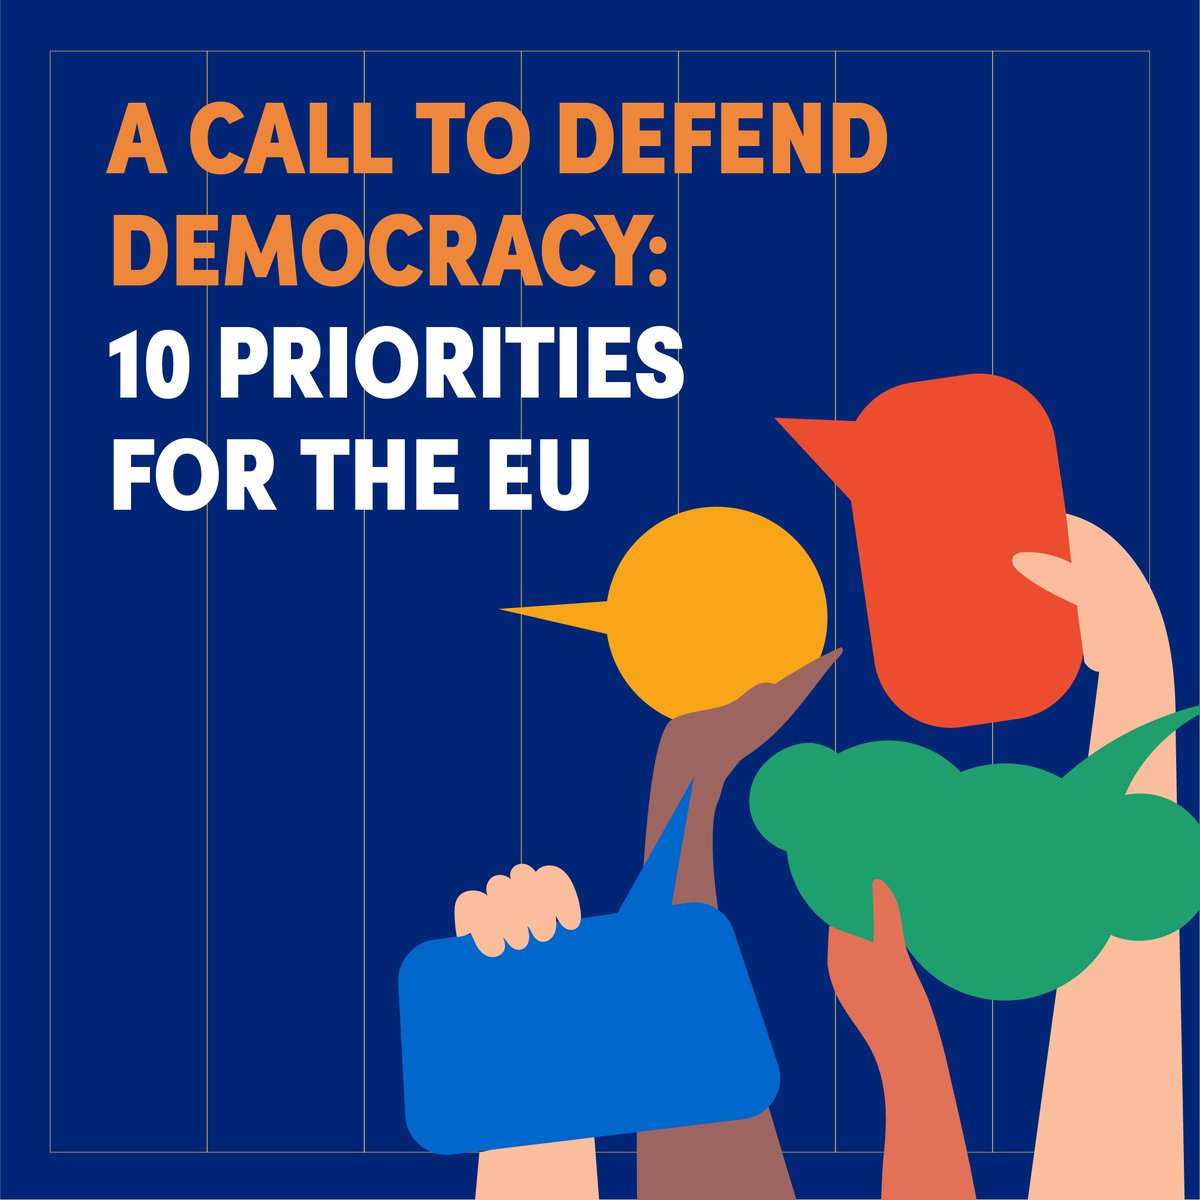 “The EU is a global champion of democracy. The future authorities of the @Europarl_EN, the @EUCouncil, & the @EU_Commission must ensure that its commitment to #DefendDemocracy does not waver in the face of a multitude of global crises.' - @KevinCasasZ ➡️ idea.int/news/global-le…